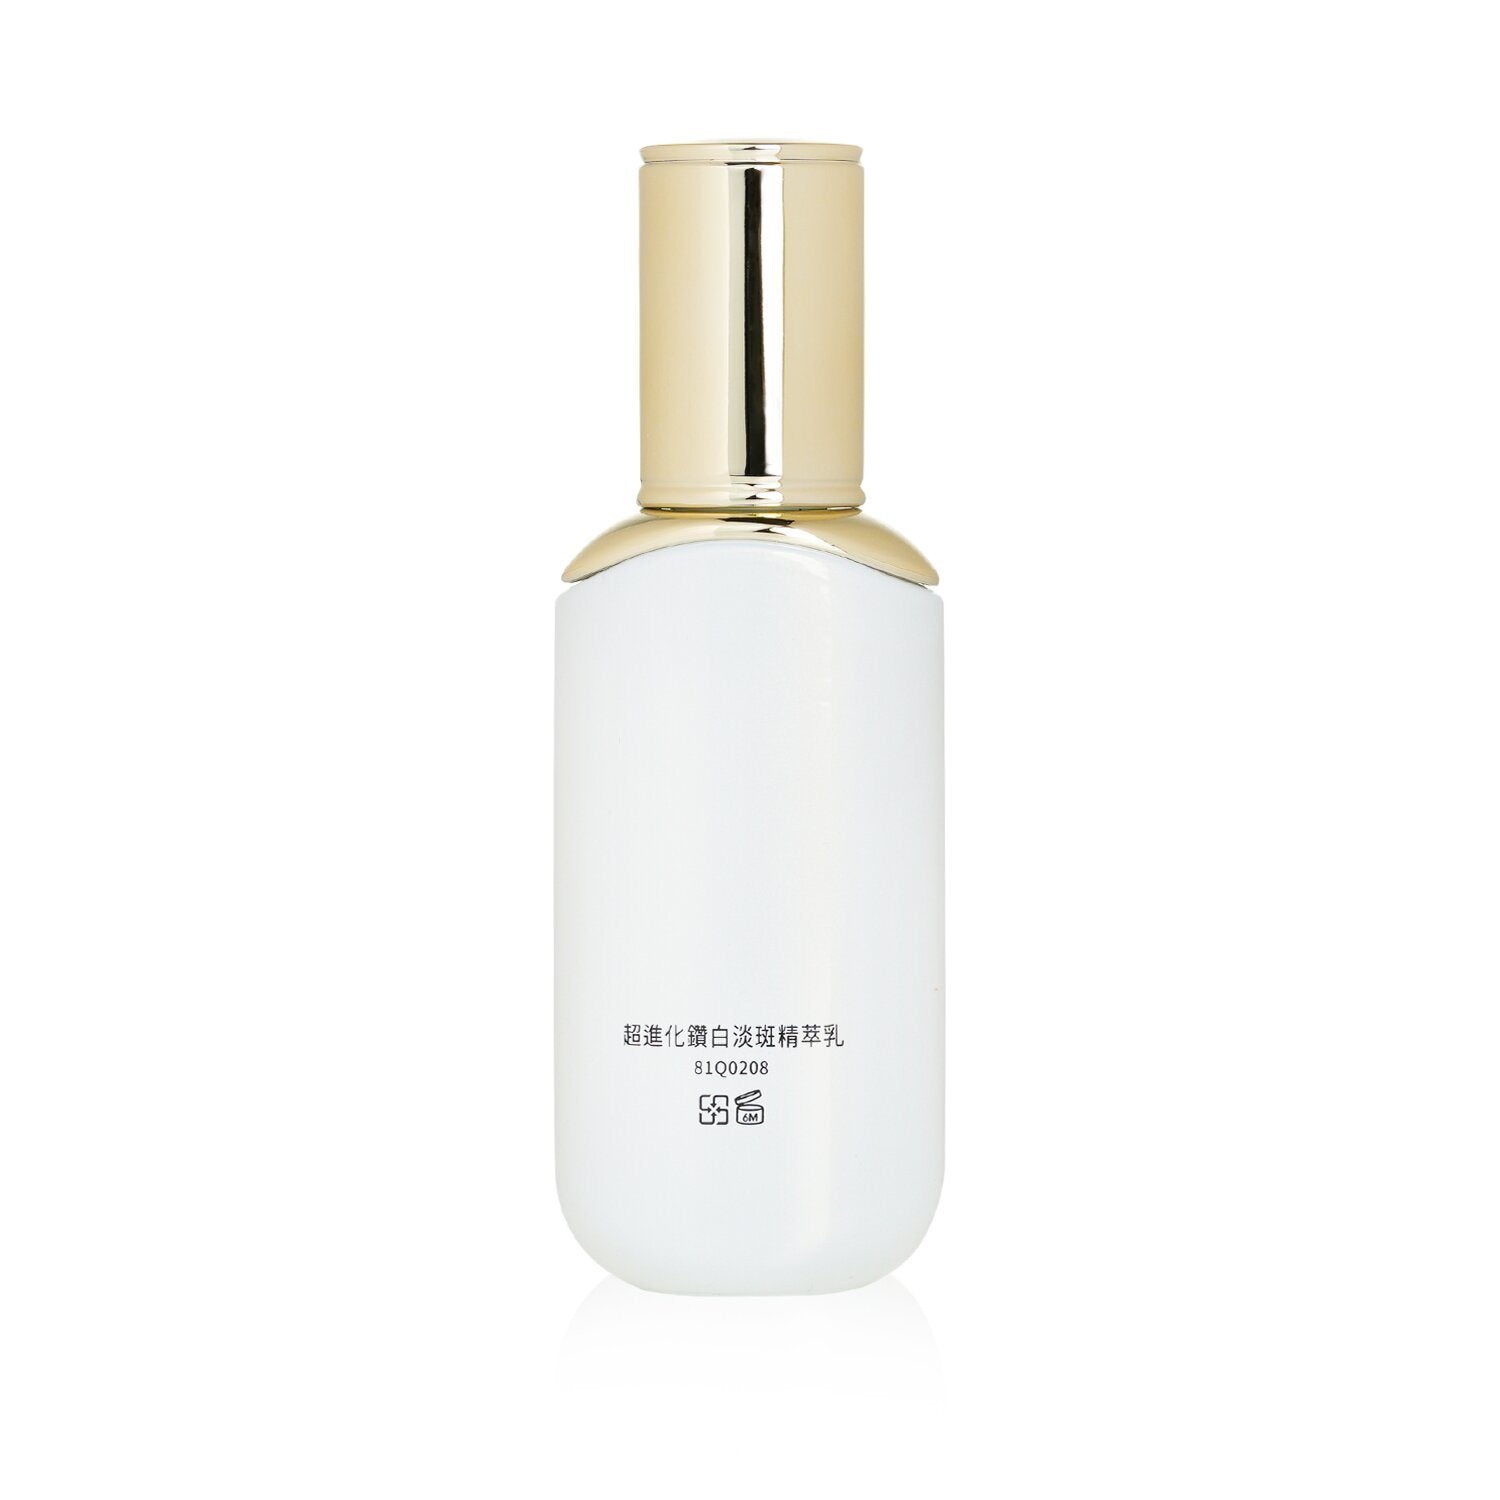 NATURAL BEAUTY - BIO UP a-GG Ultimate Whitening Emulsion Lotion 81Q0208 45ml/1.52oz - lolaluxeshop